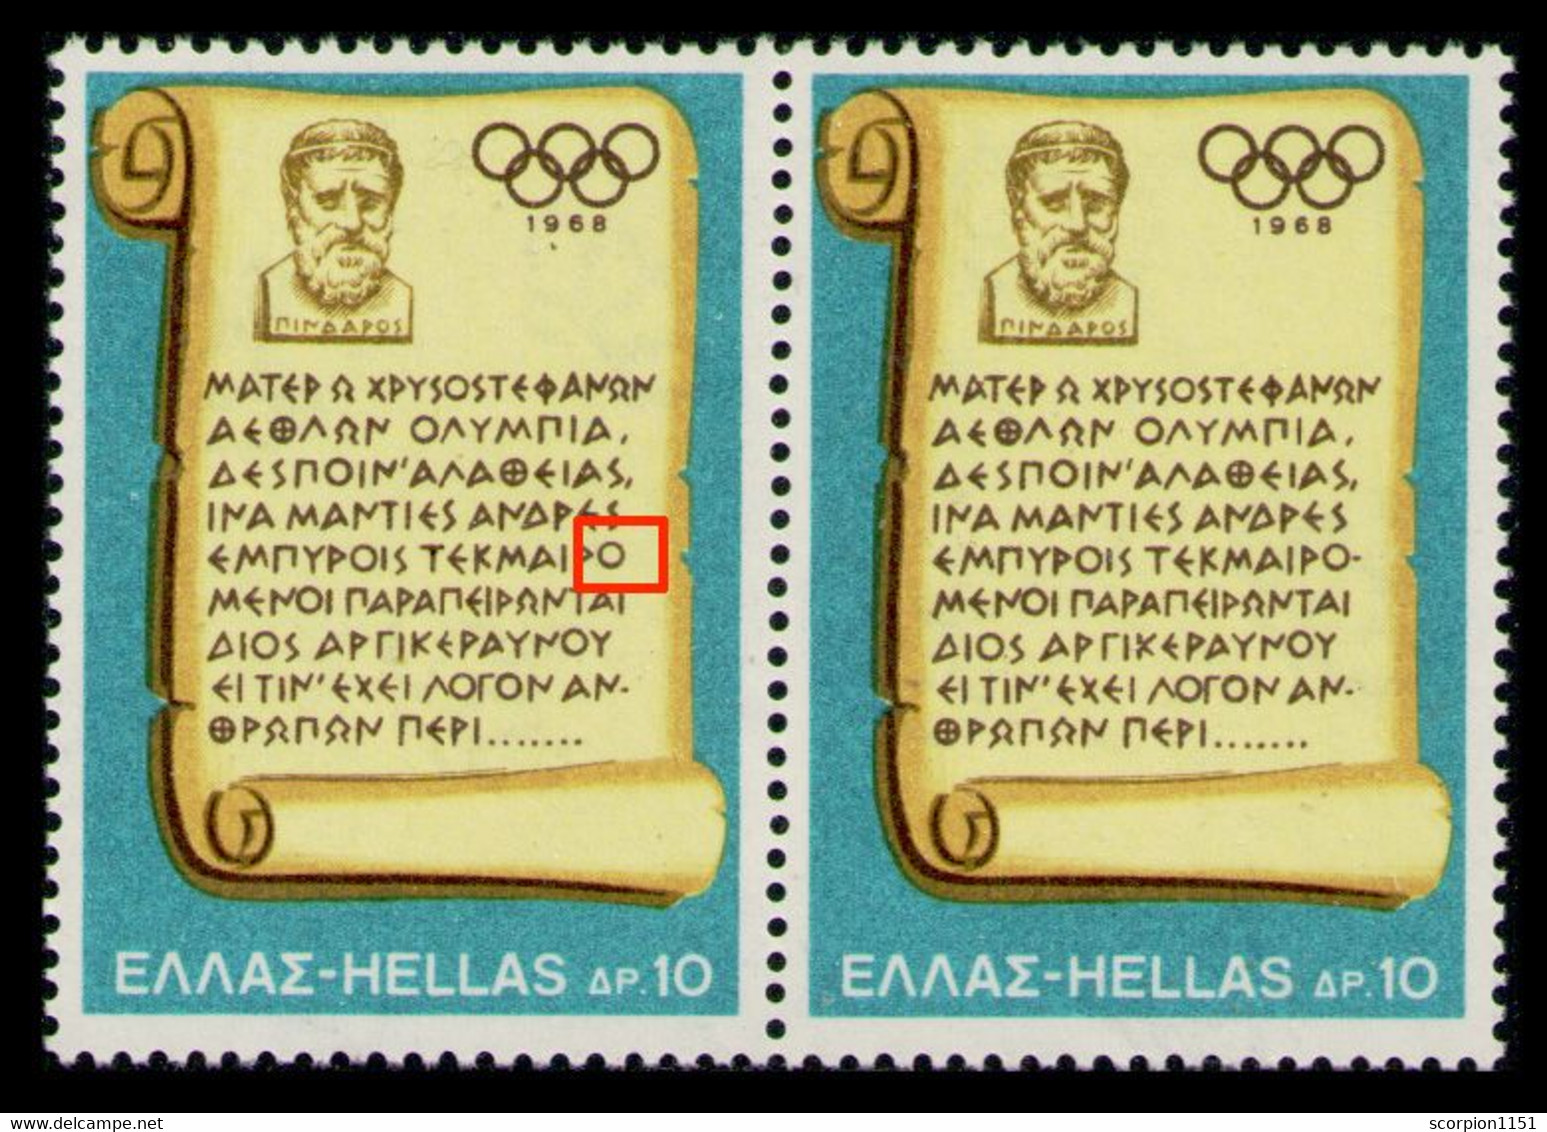 GREECE 1968 - ERROR No Dash After "O" At The Left Stamp RR In Pair - MNH** - Nuovi